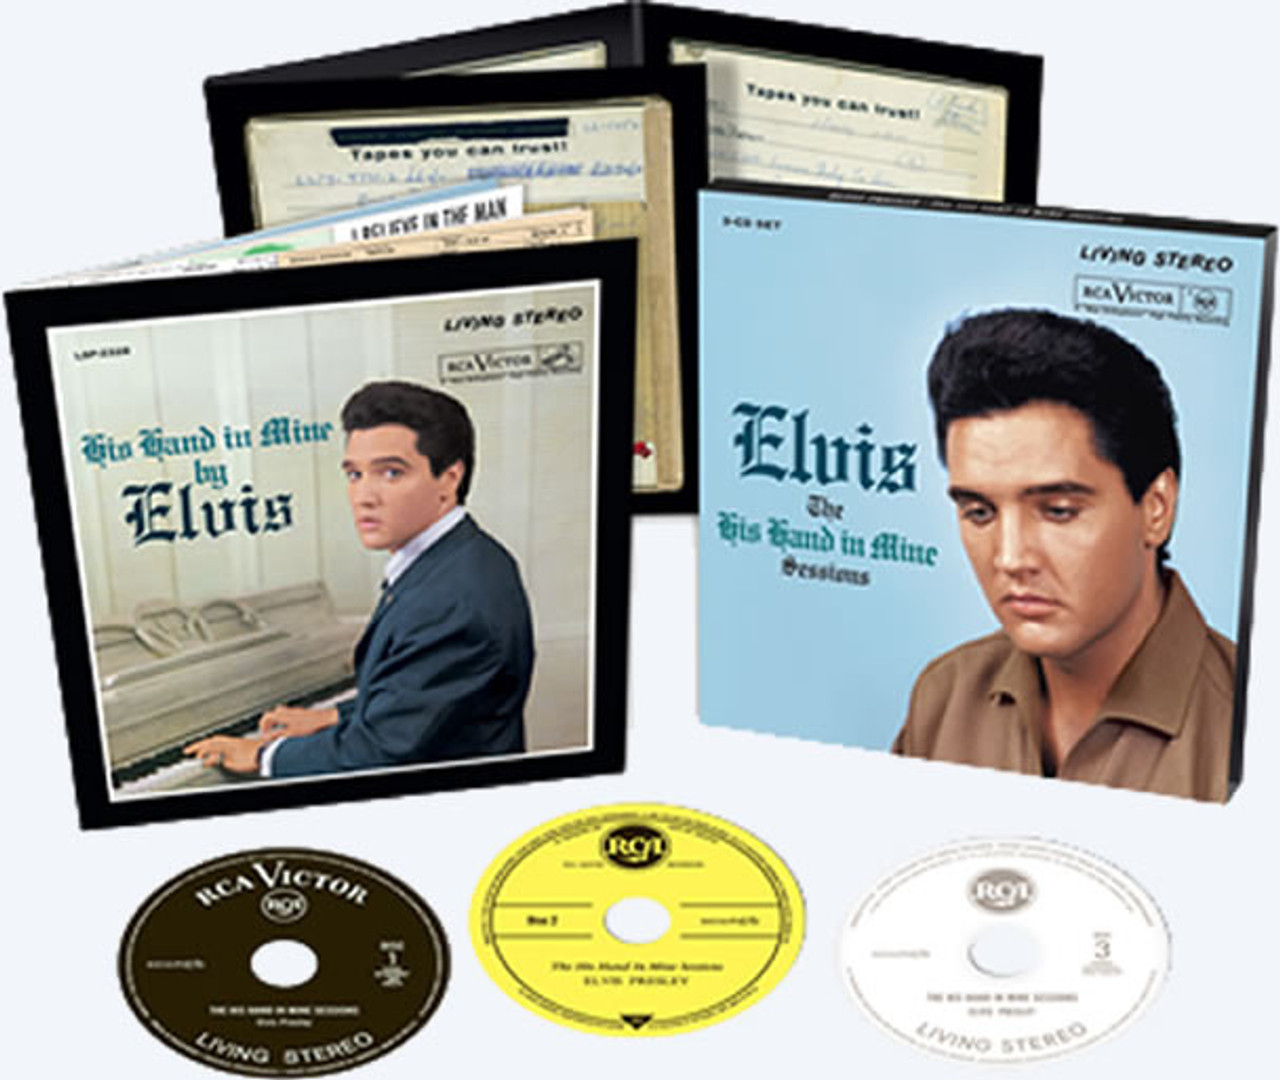 Box　Dream　Sessions　That　from　Elvis:　Set　His　The　CD　Mine　Hand　In　Follow